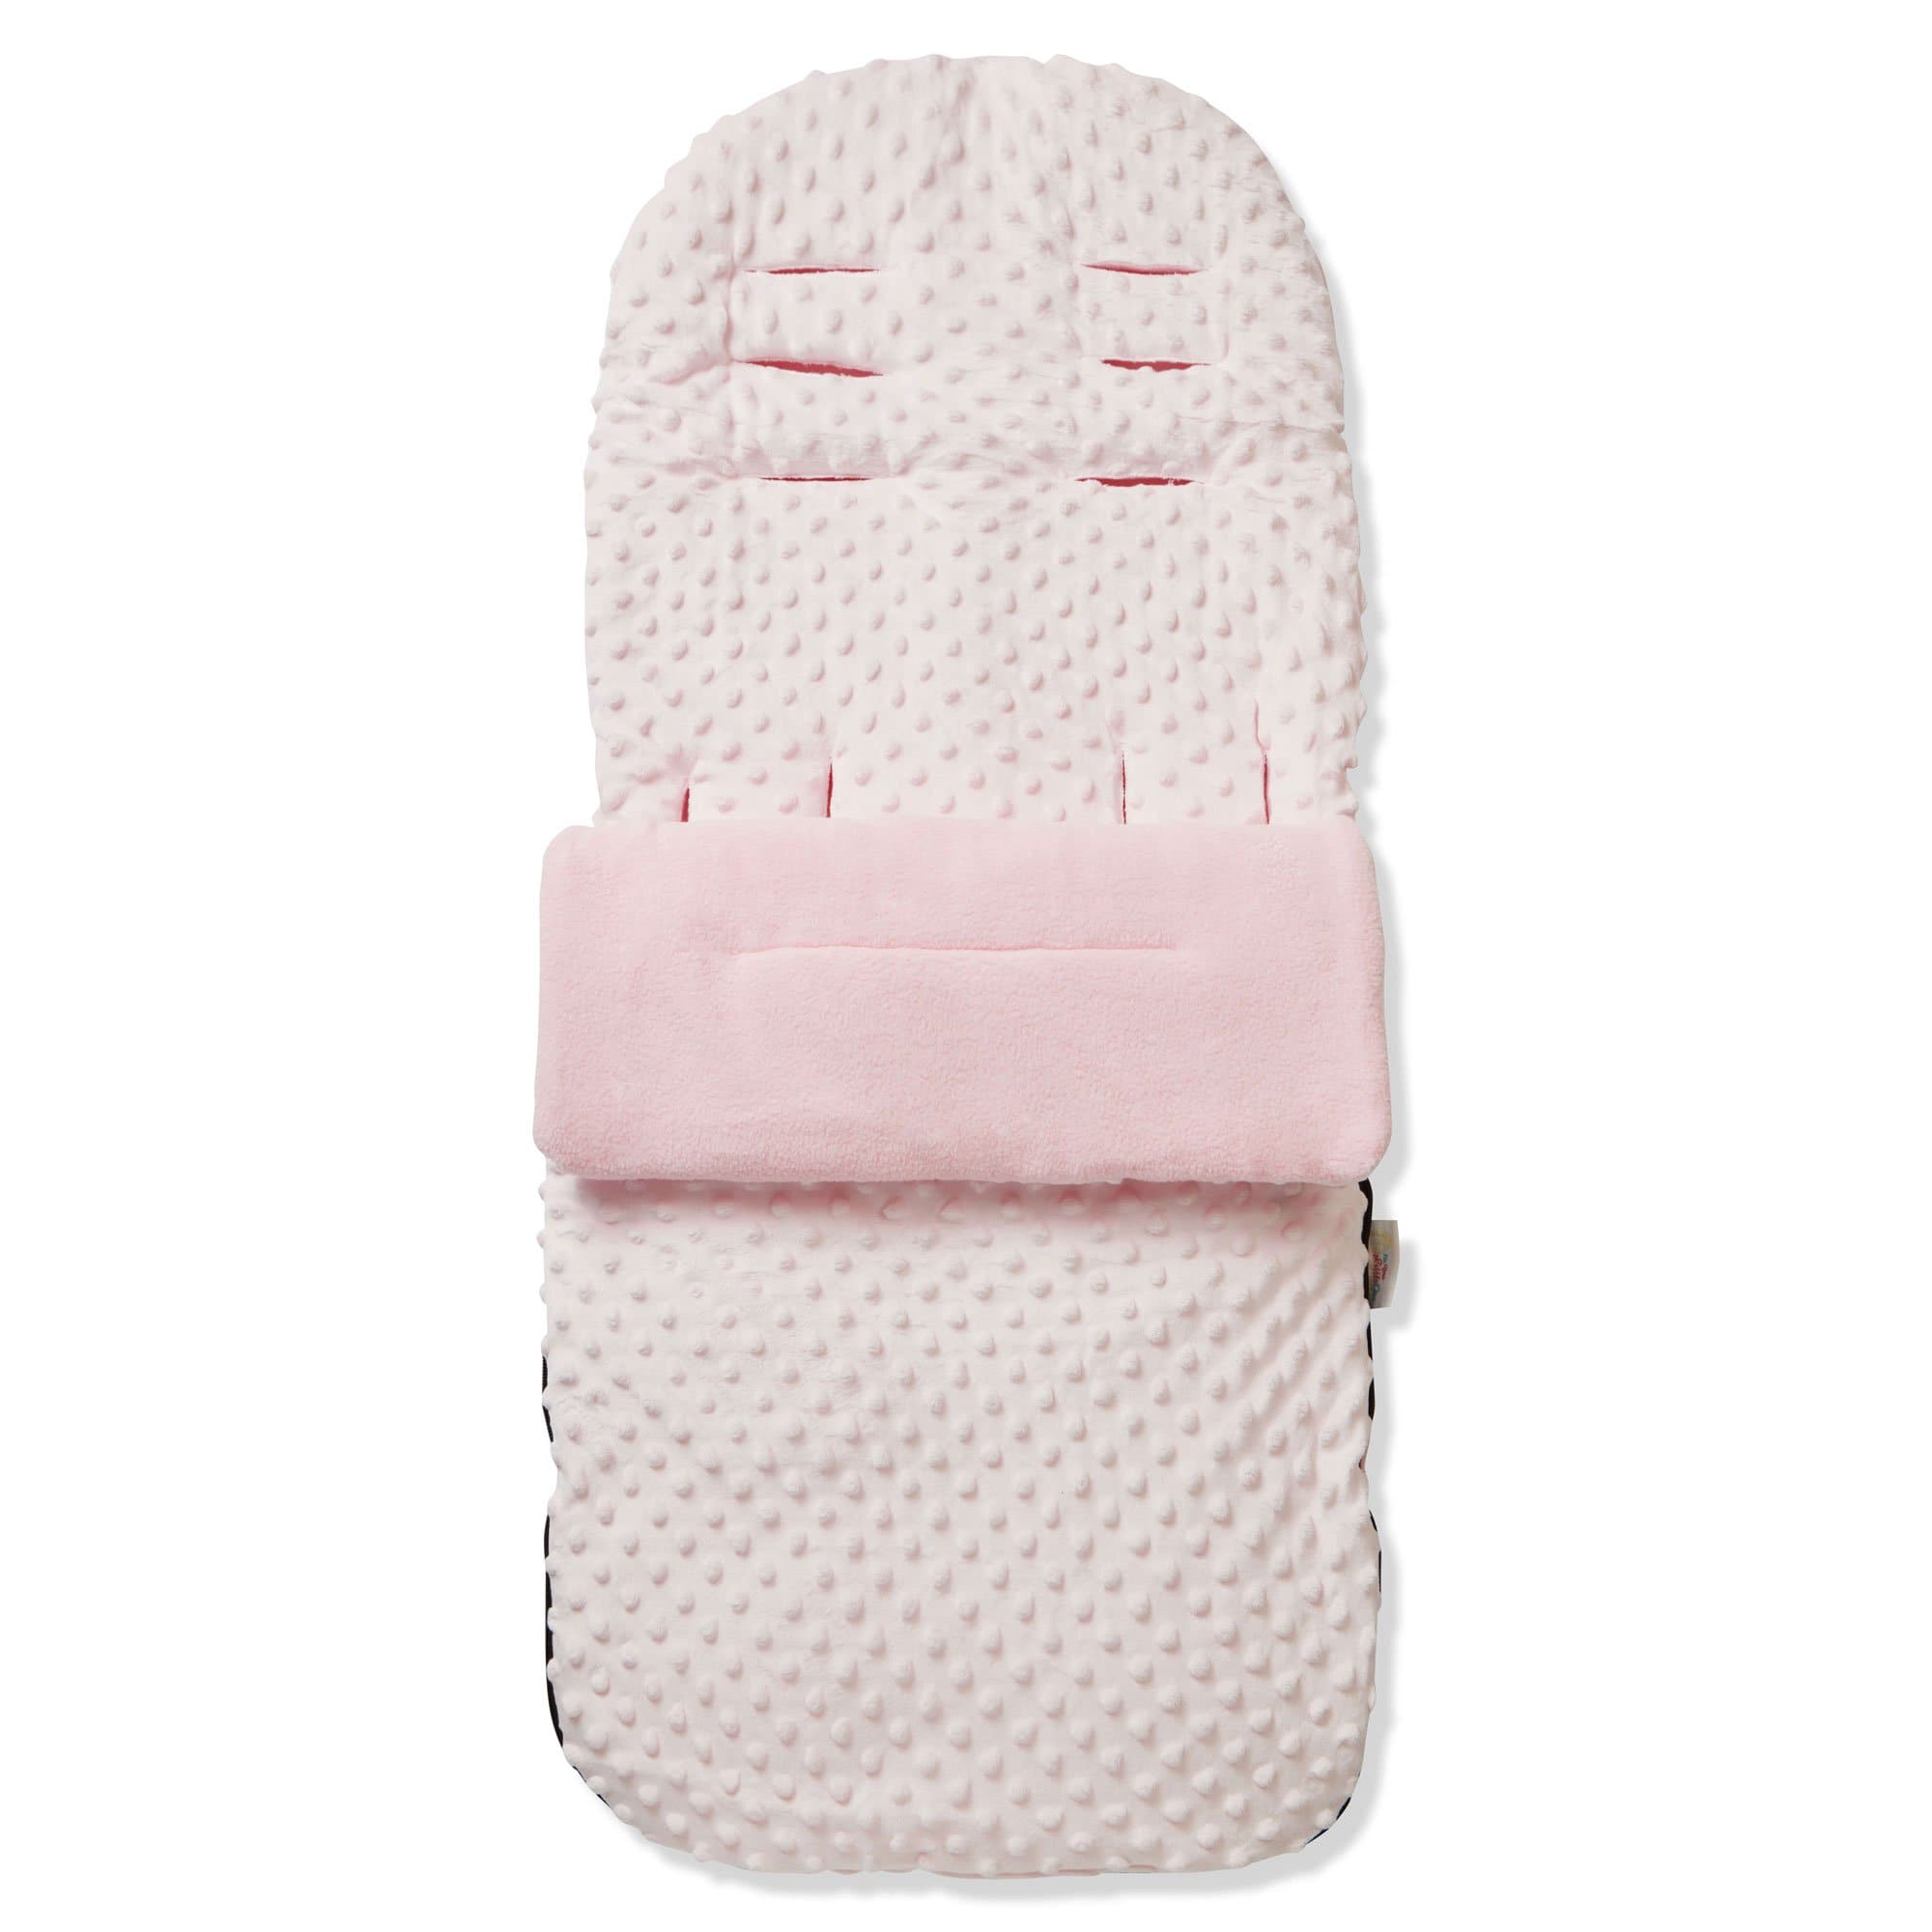 Dimple Footmuff / Cosy Toes Compatible with Noukies - Pink / Fits All Models | For Your Little One